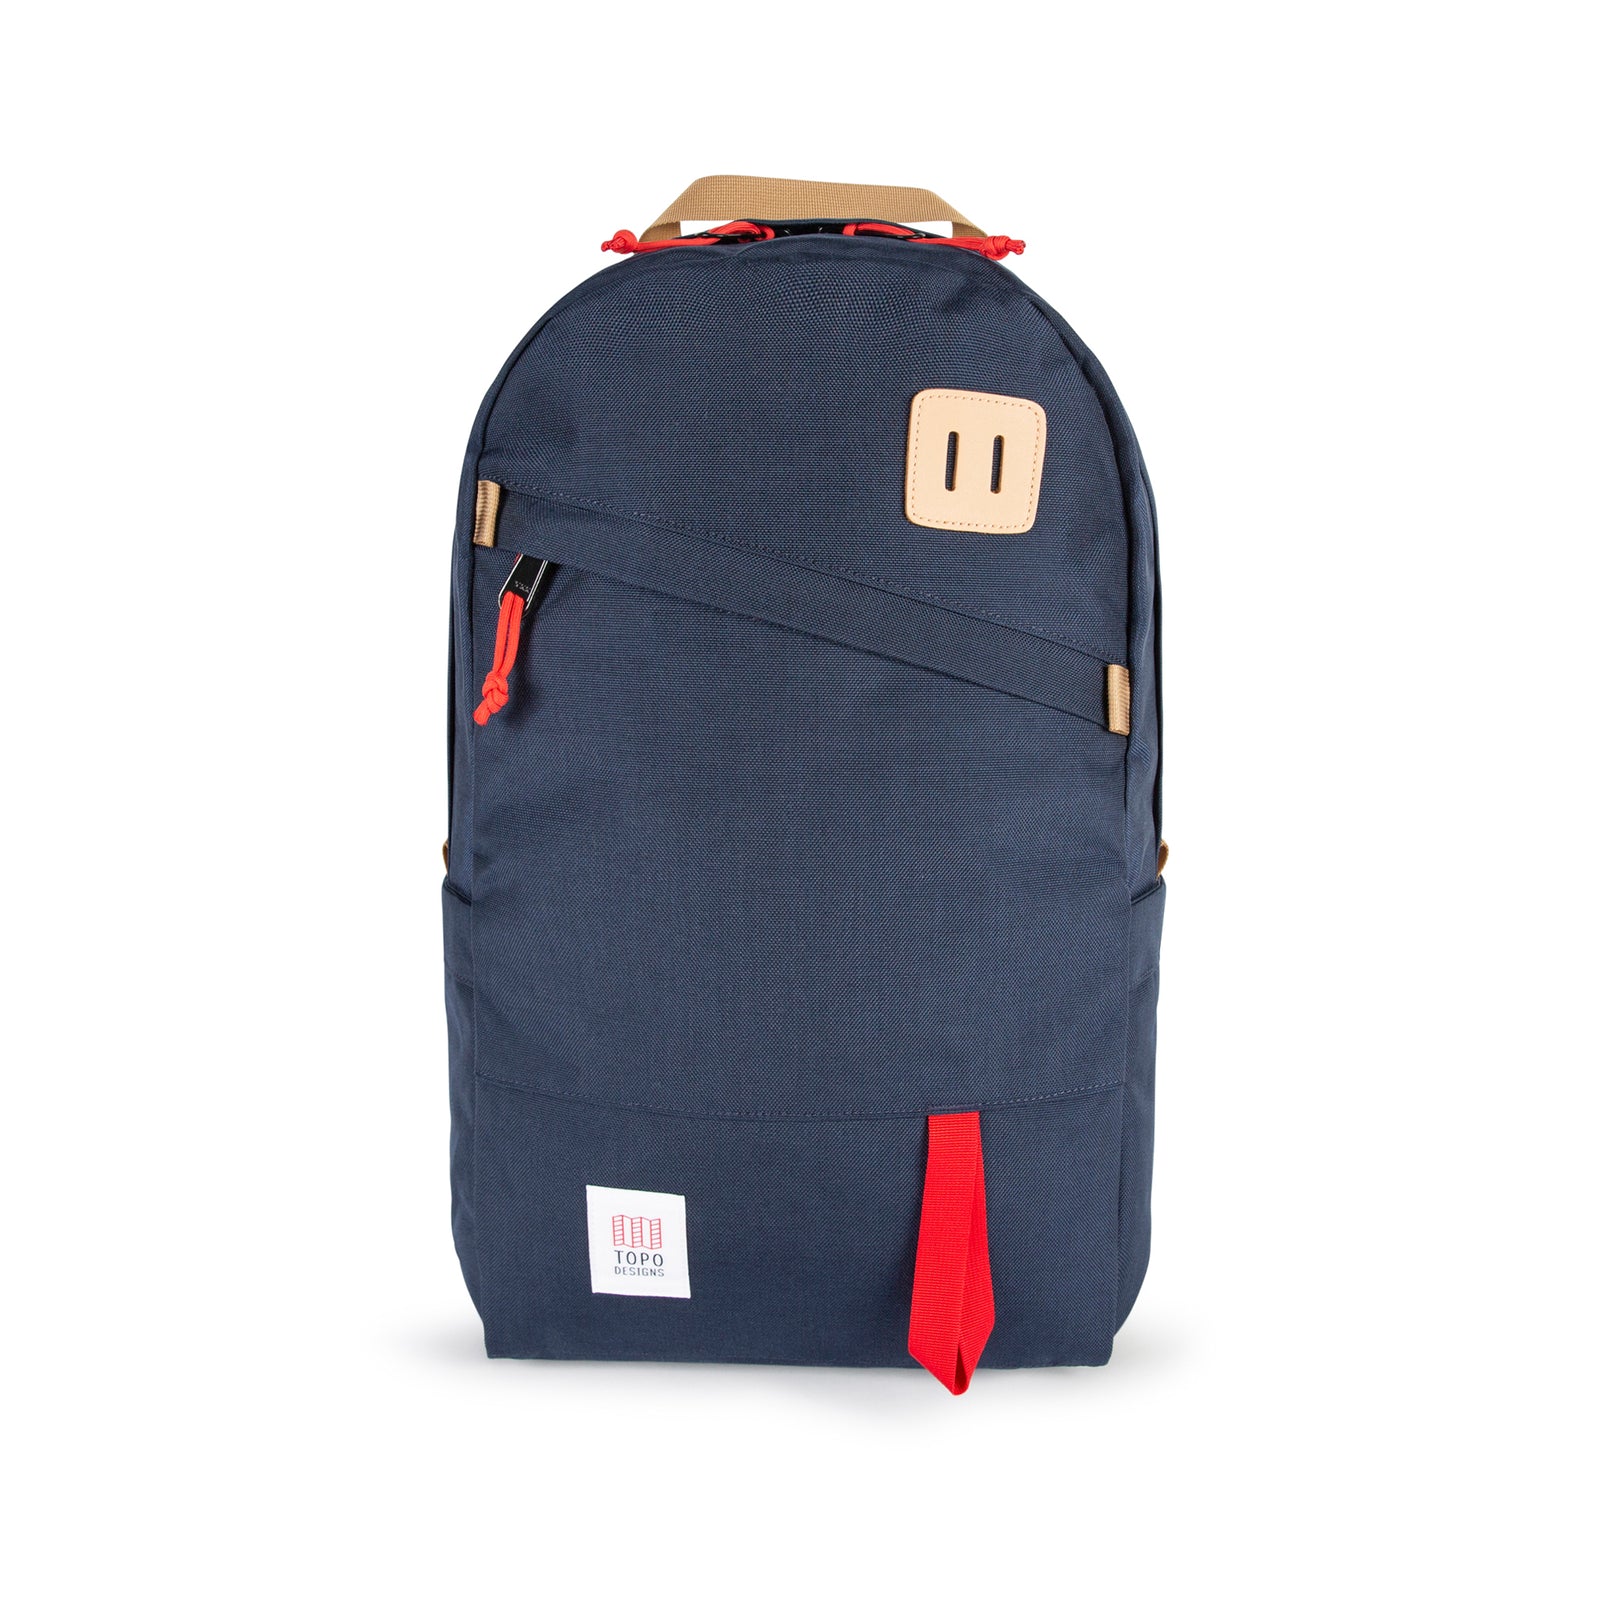 Topo Designs Daypack Classic 100% recycled nylon laptop backpack for work or school in "Navy / Red" blue.